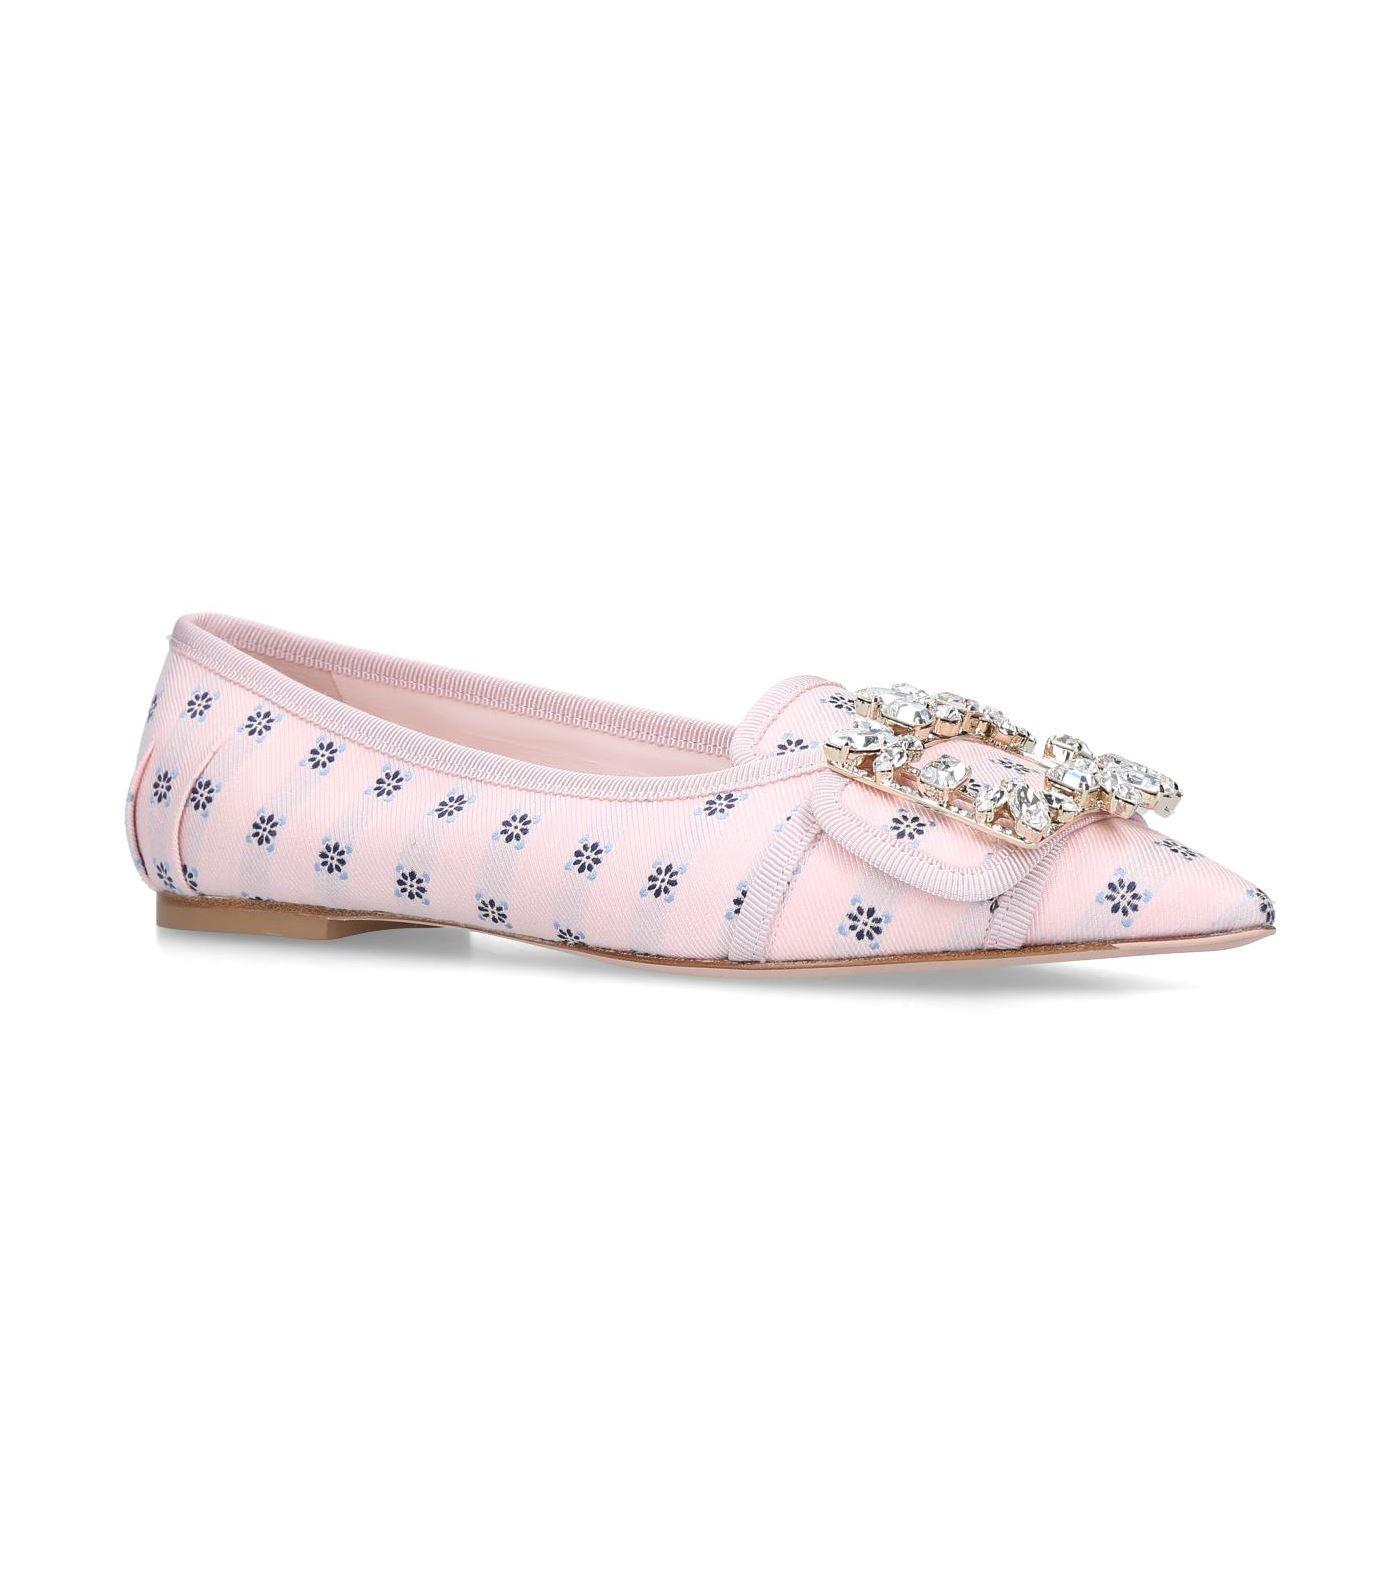 Roger Vivier Leather 10mm Buckle Printed Flats in Pink - Save 18 